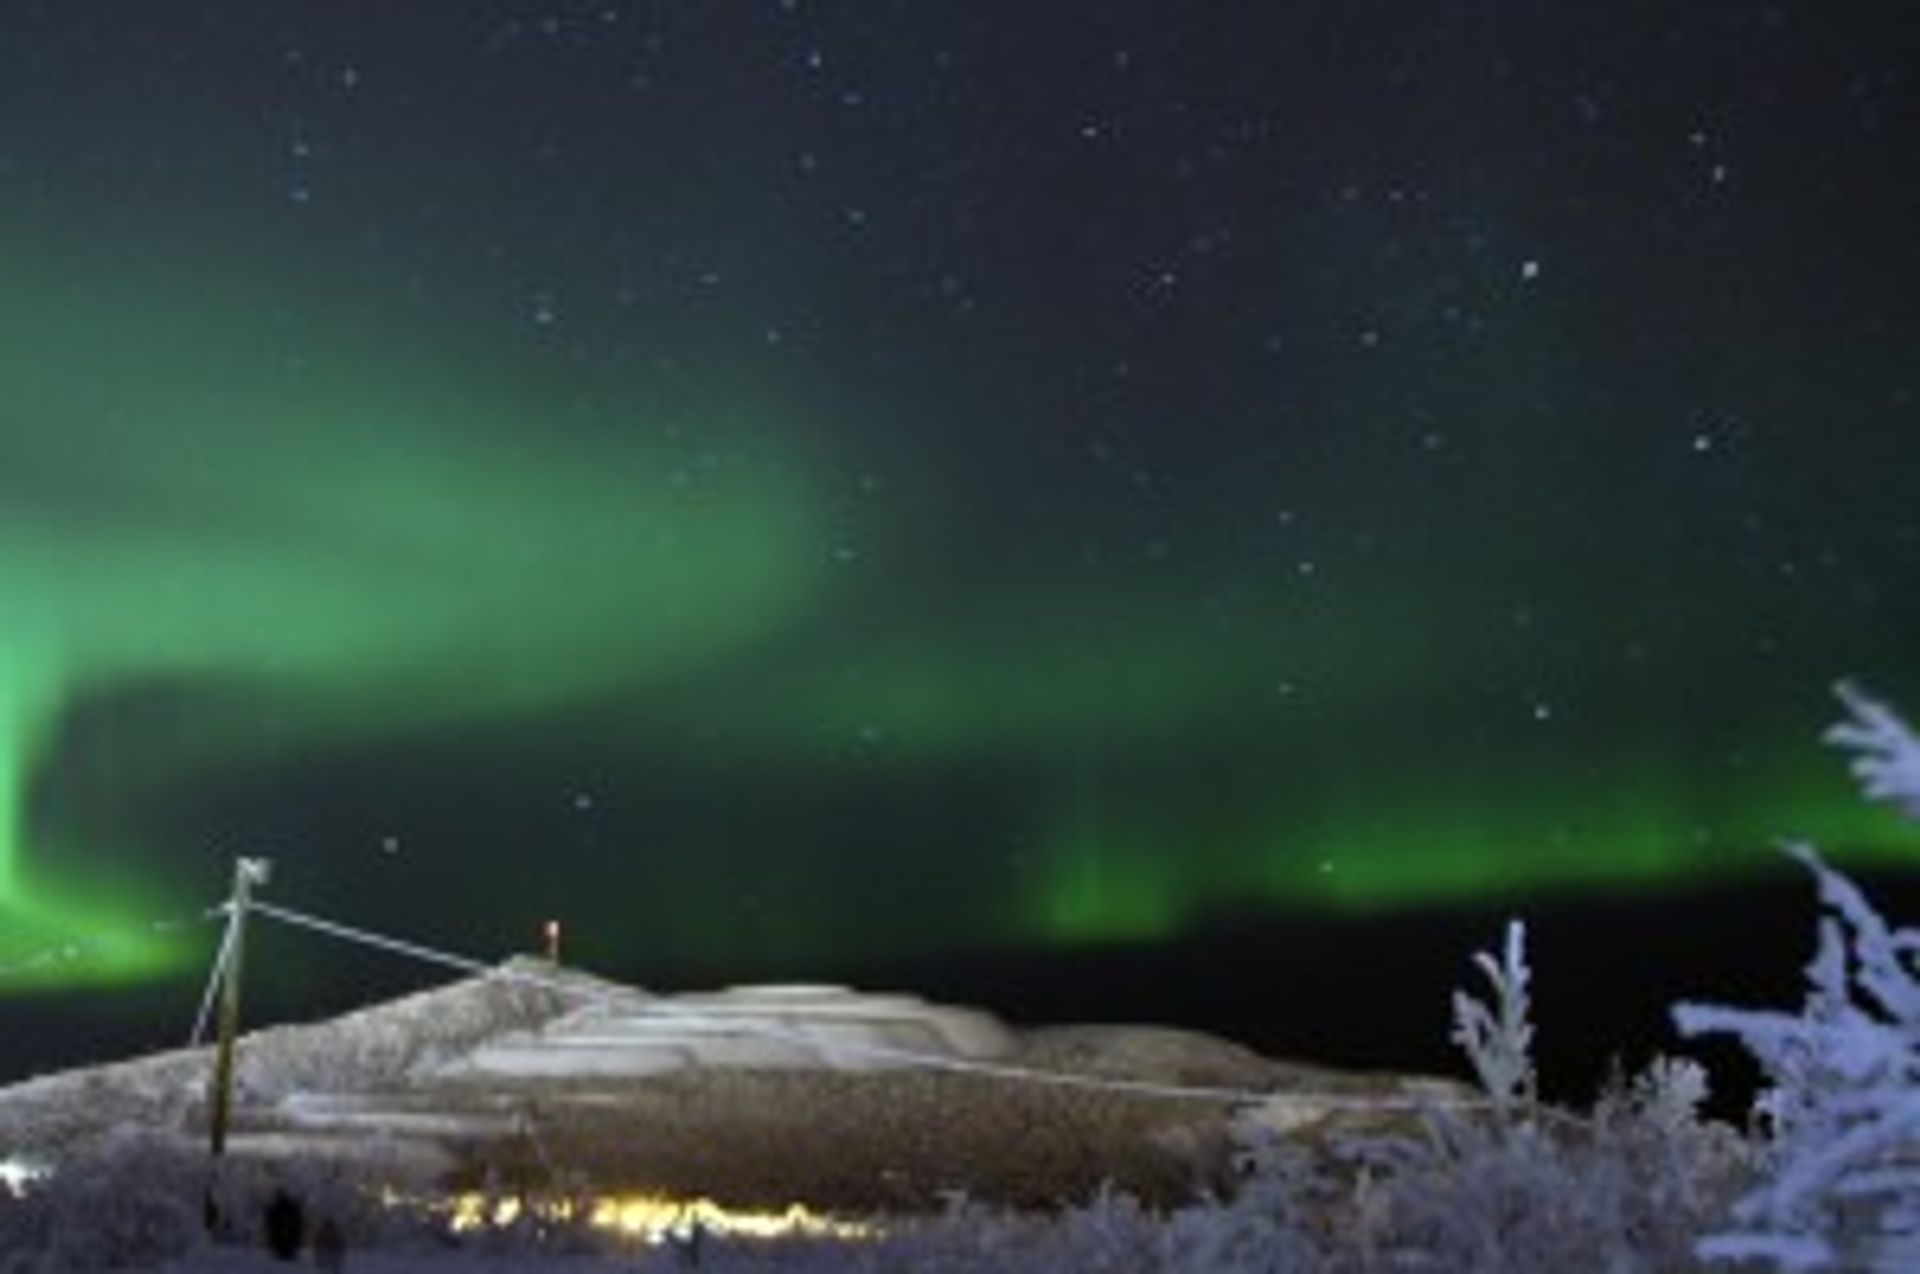 A picture of the green northern lights that often occur in the northern part of Sweden by mountains.